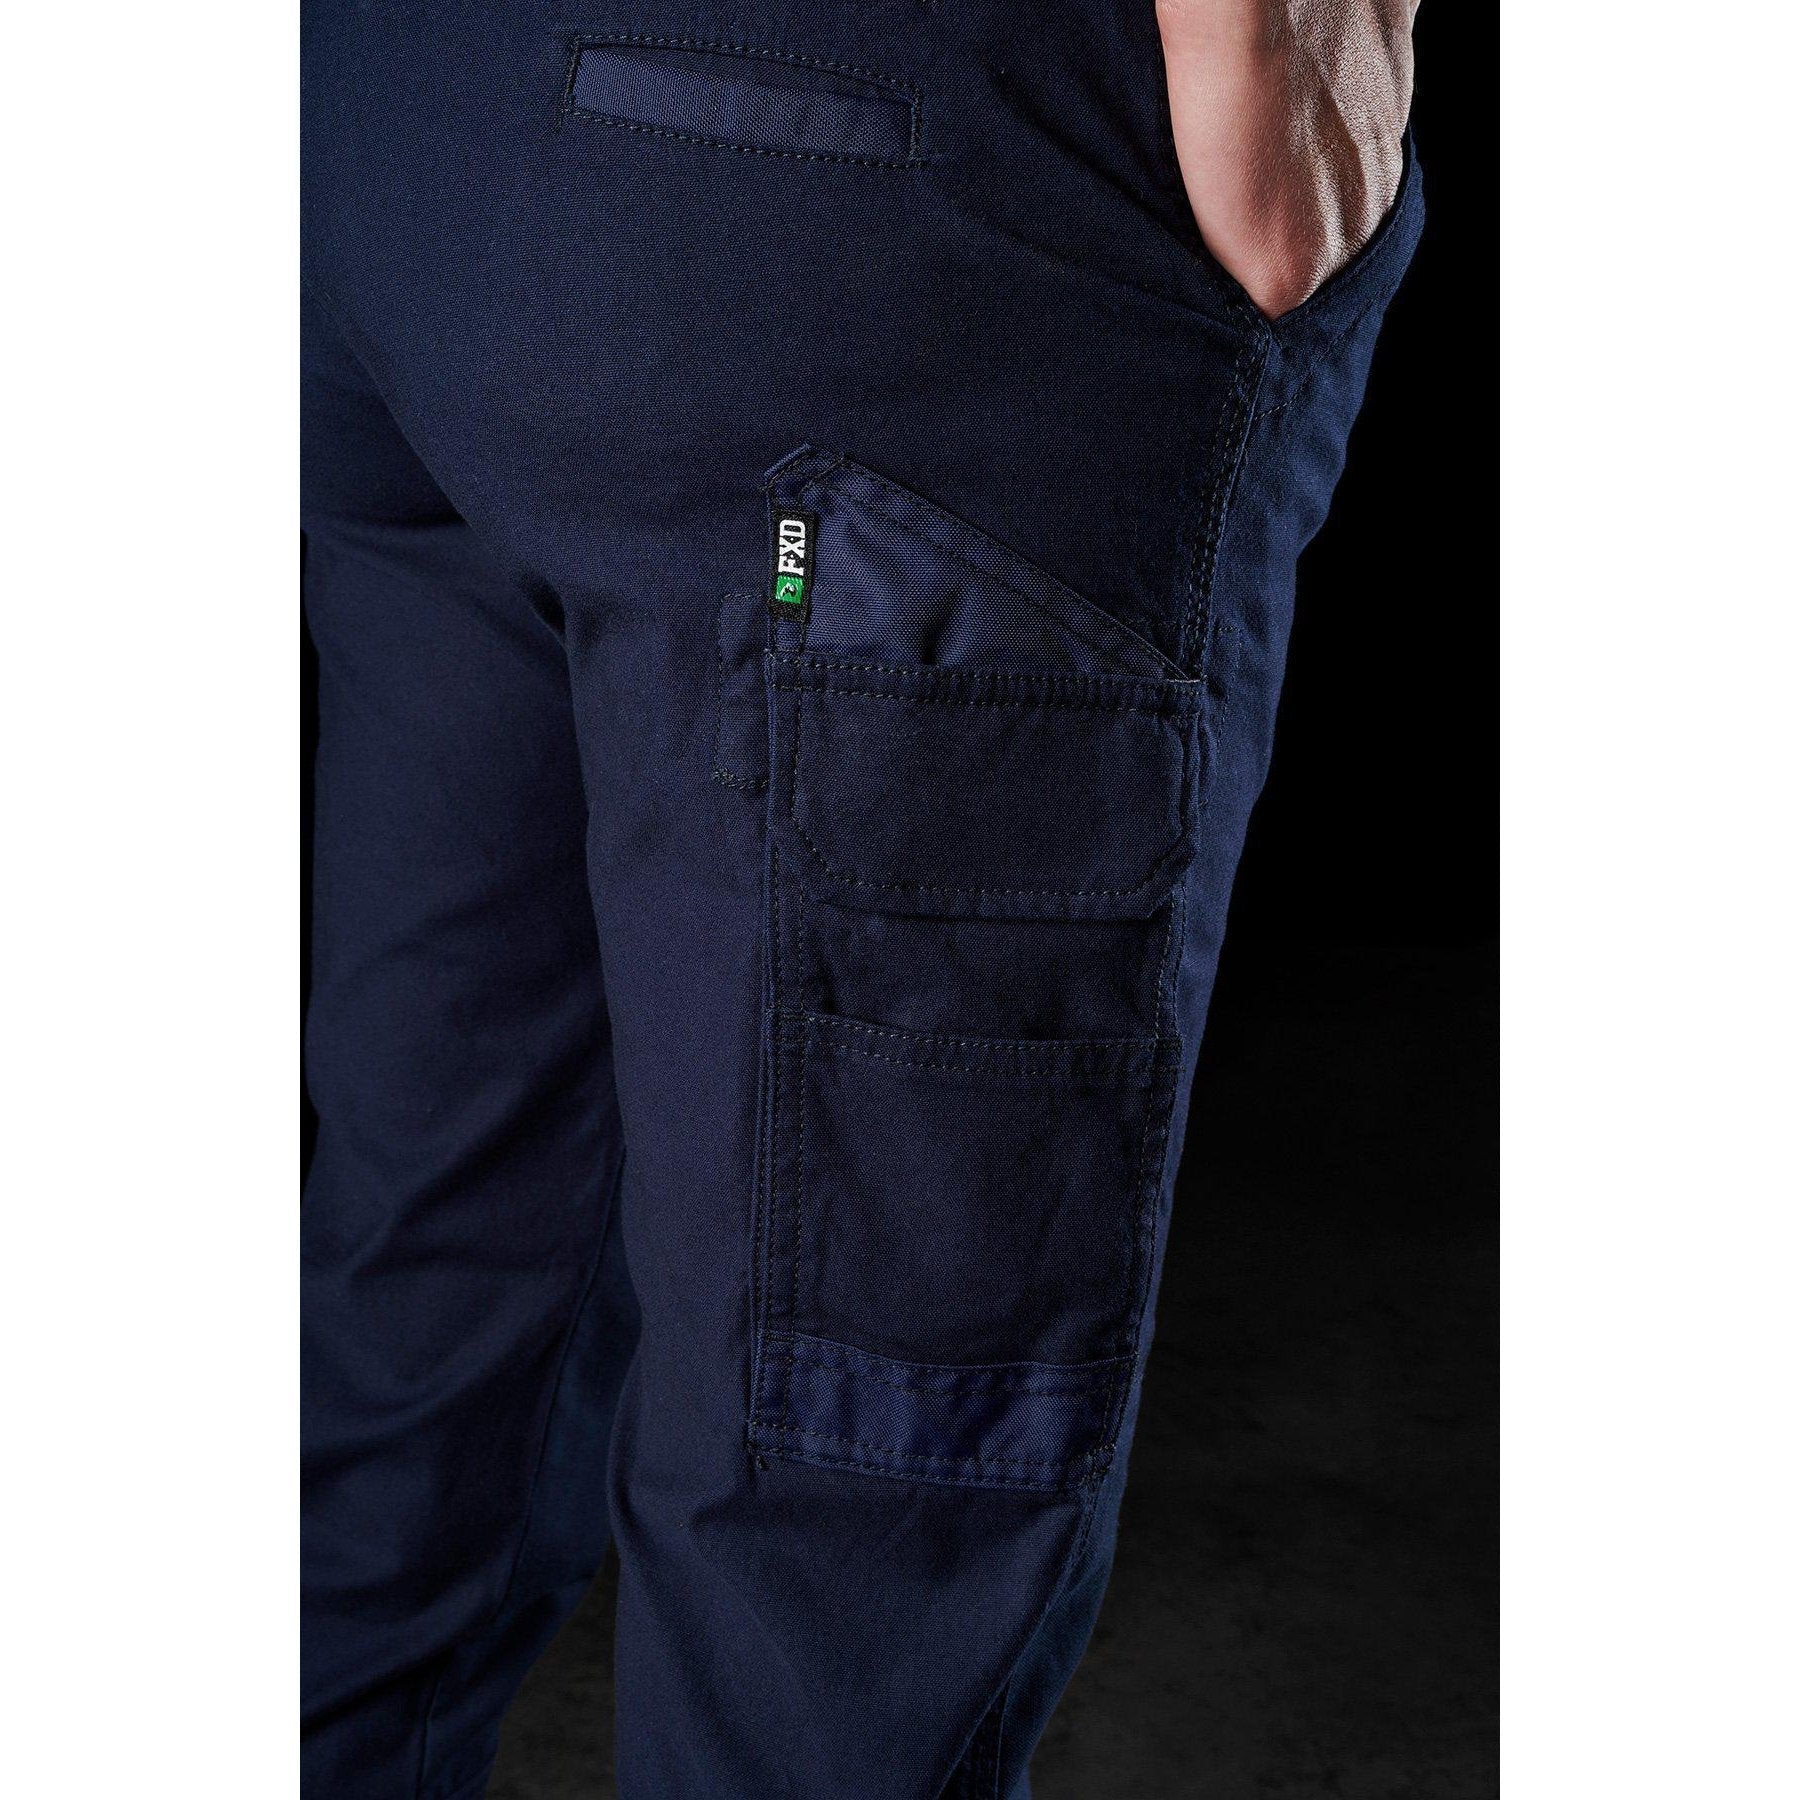 FXD Womens Stretched Cuffed Work Pants - WP-4W – Womens Workwear